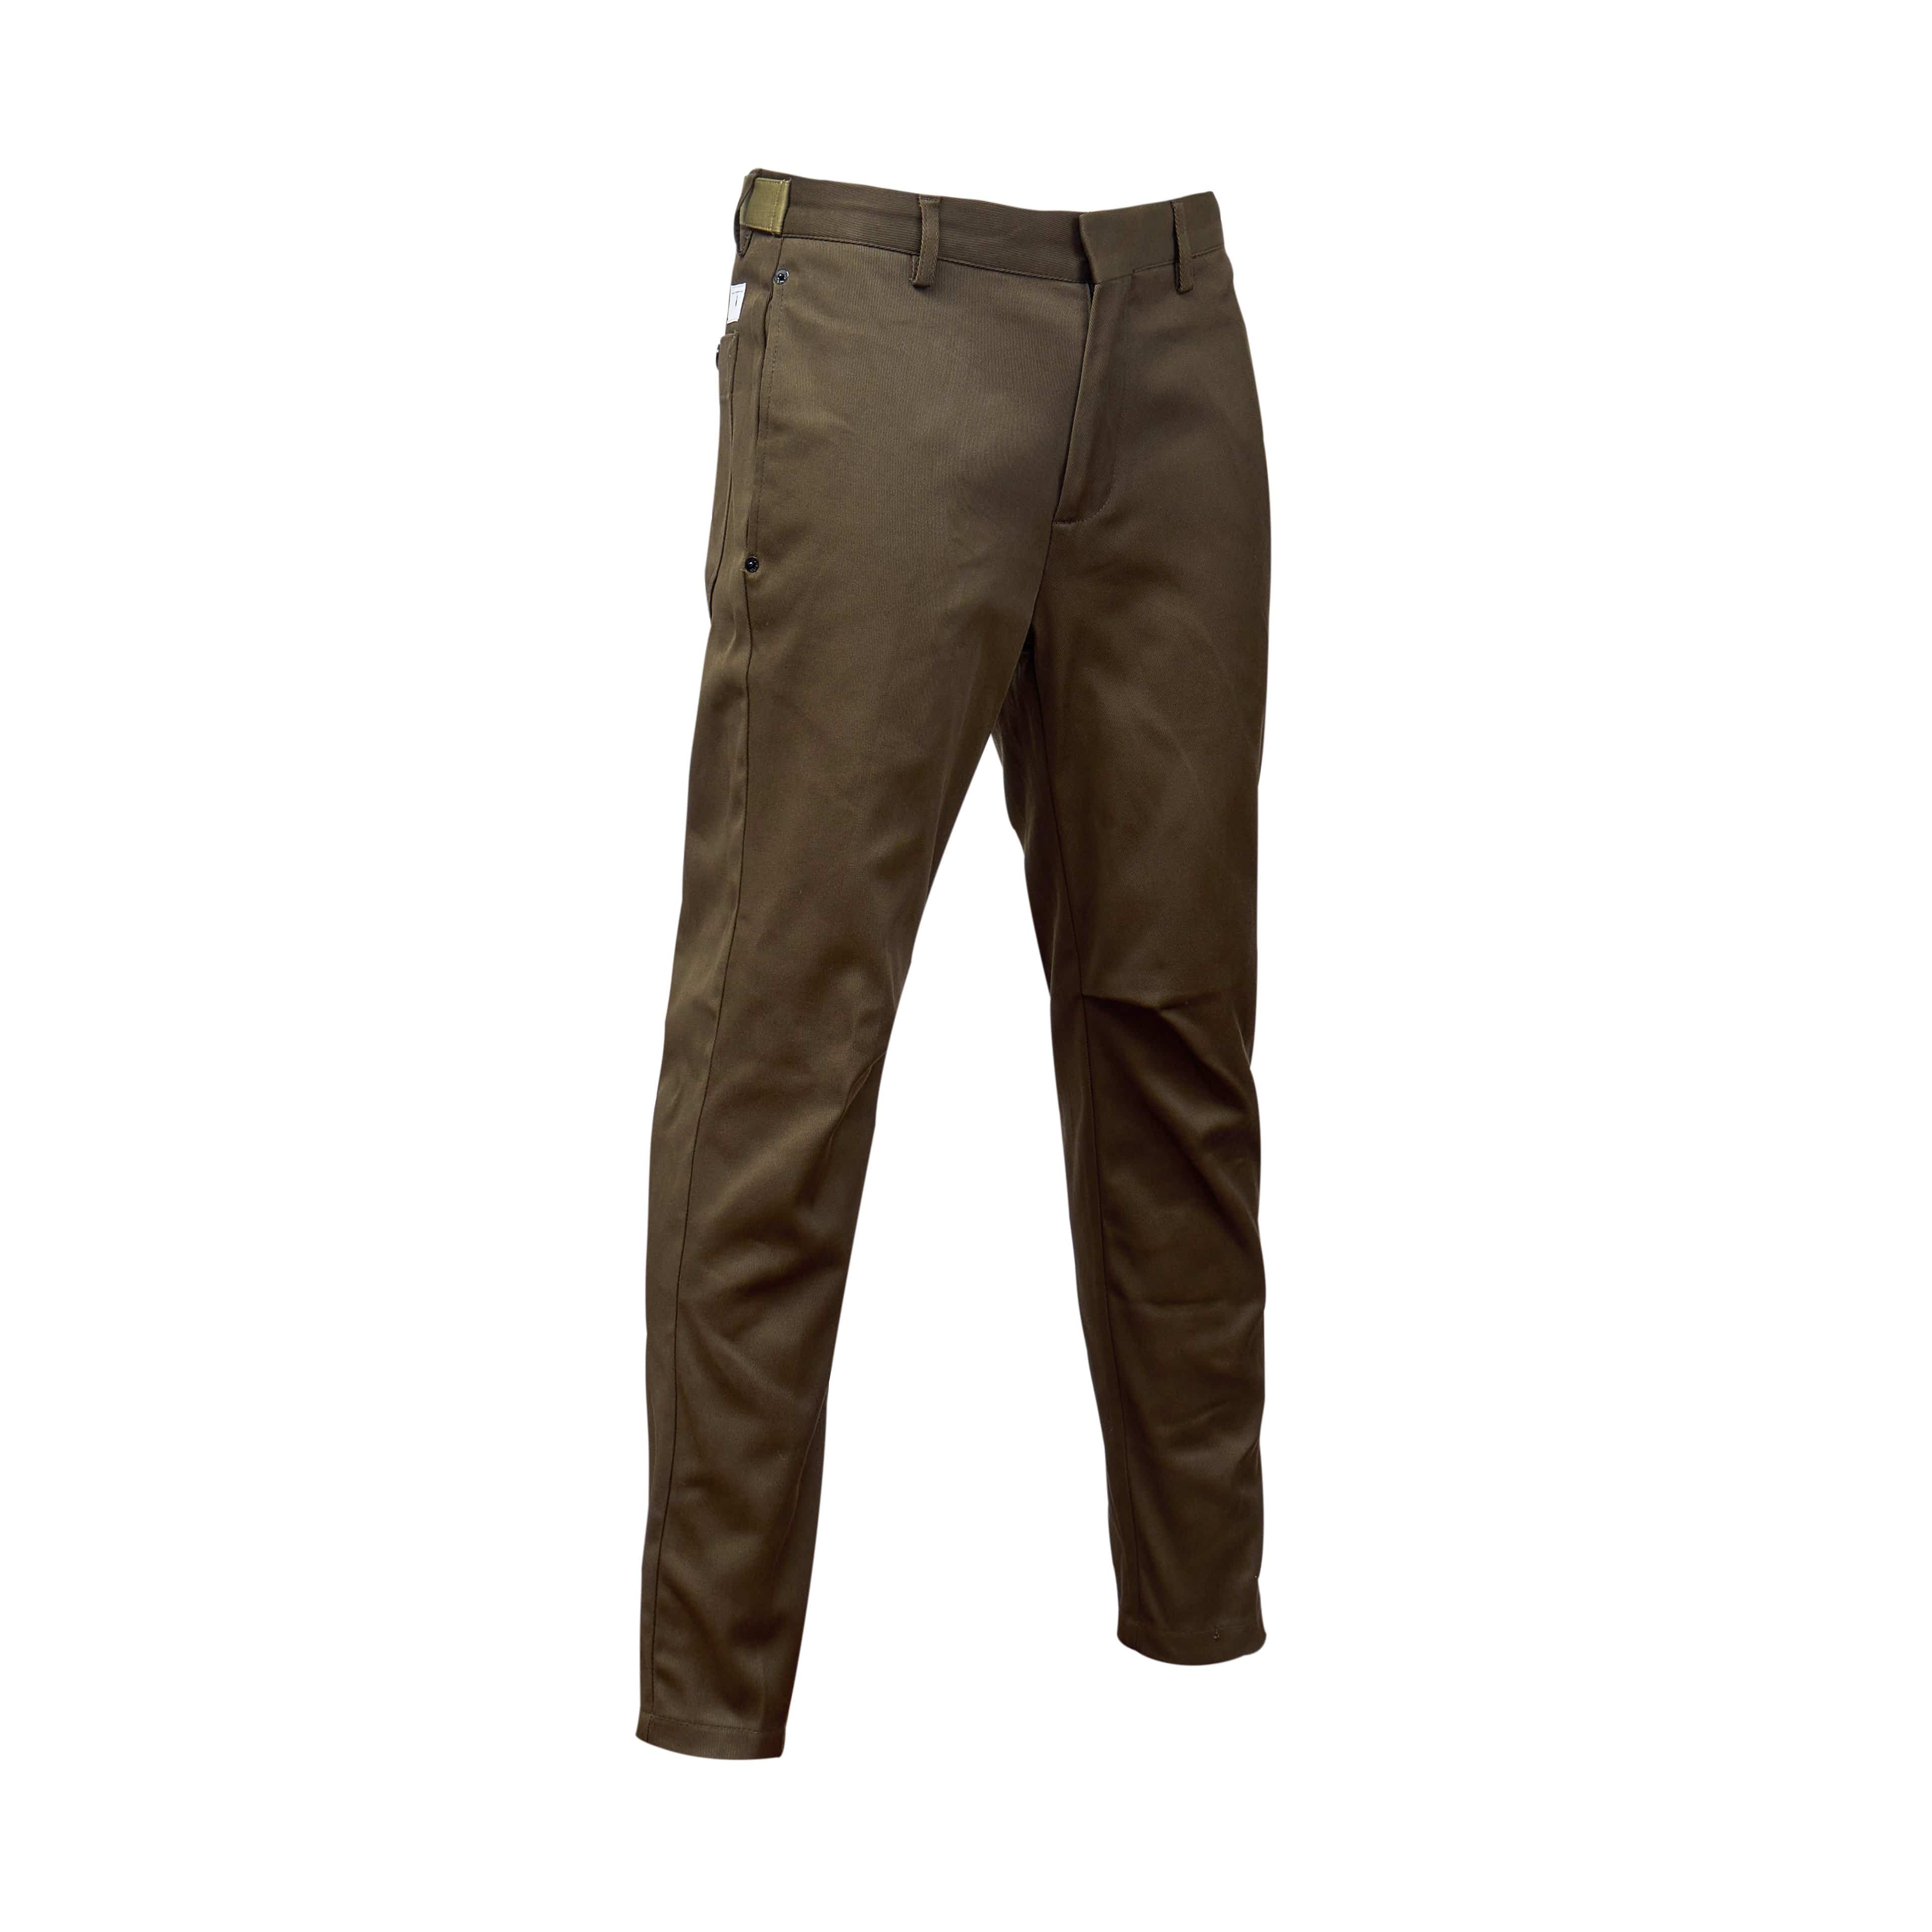 PMDS 03482 Chino - 124 Shoes